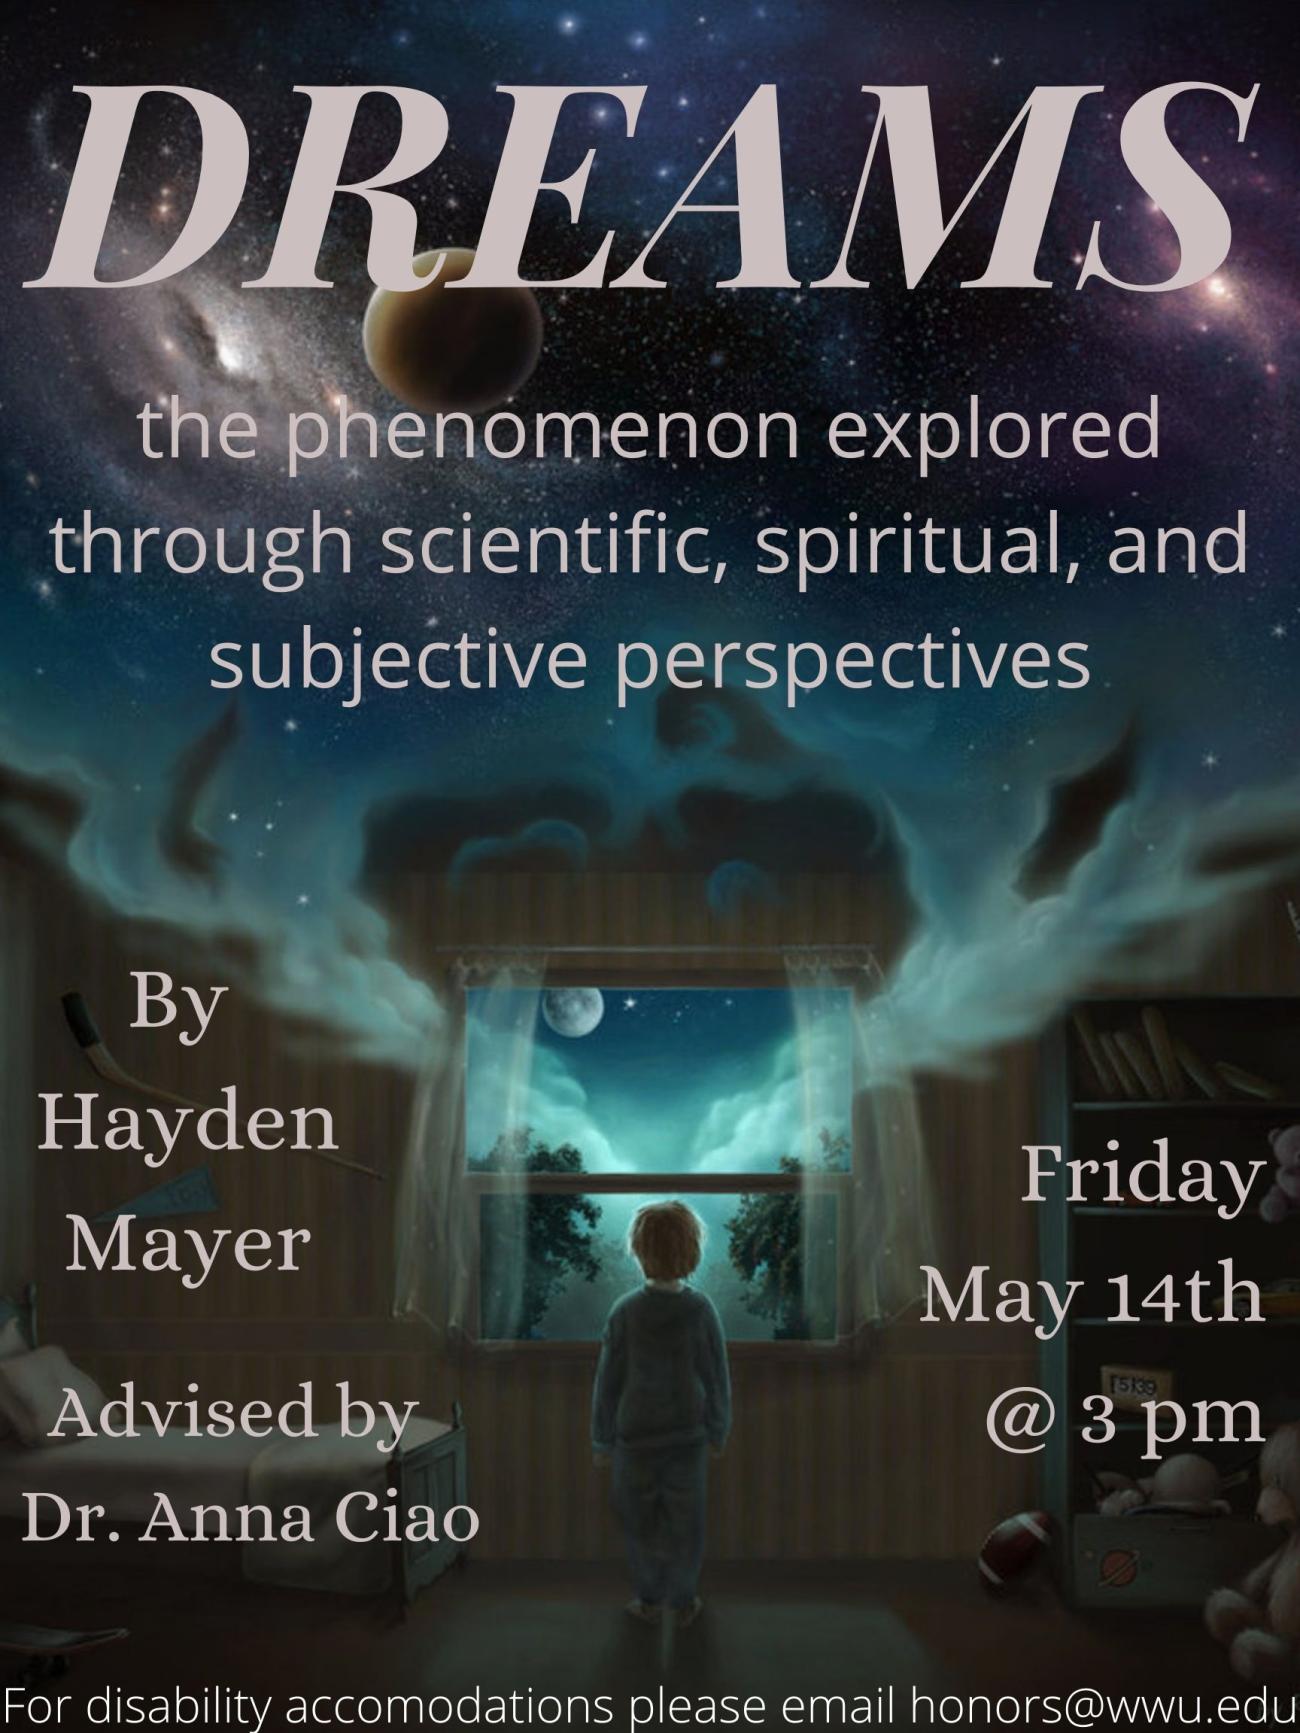 Illustration of a boy in his pajamas awoken from his night’s rest, peering out the window in his bedroom as a blue fog rolls in. In the dense part of the fog there are planets and stars giving a mystical feel. Bold white text covers the top and sides of this image: "Dreams: the phenomenon explored through scientific, spiritual, and subjective perspectives. By Hayden Mayer. Advised by Dr. Anna Ciao. Friday, May 14th at 3 pm. For disability accommodations please email honors@wwu.edu.